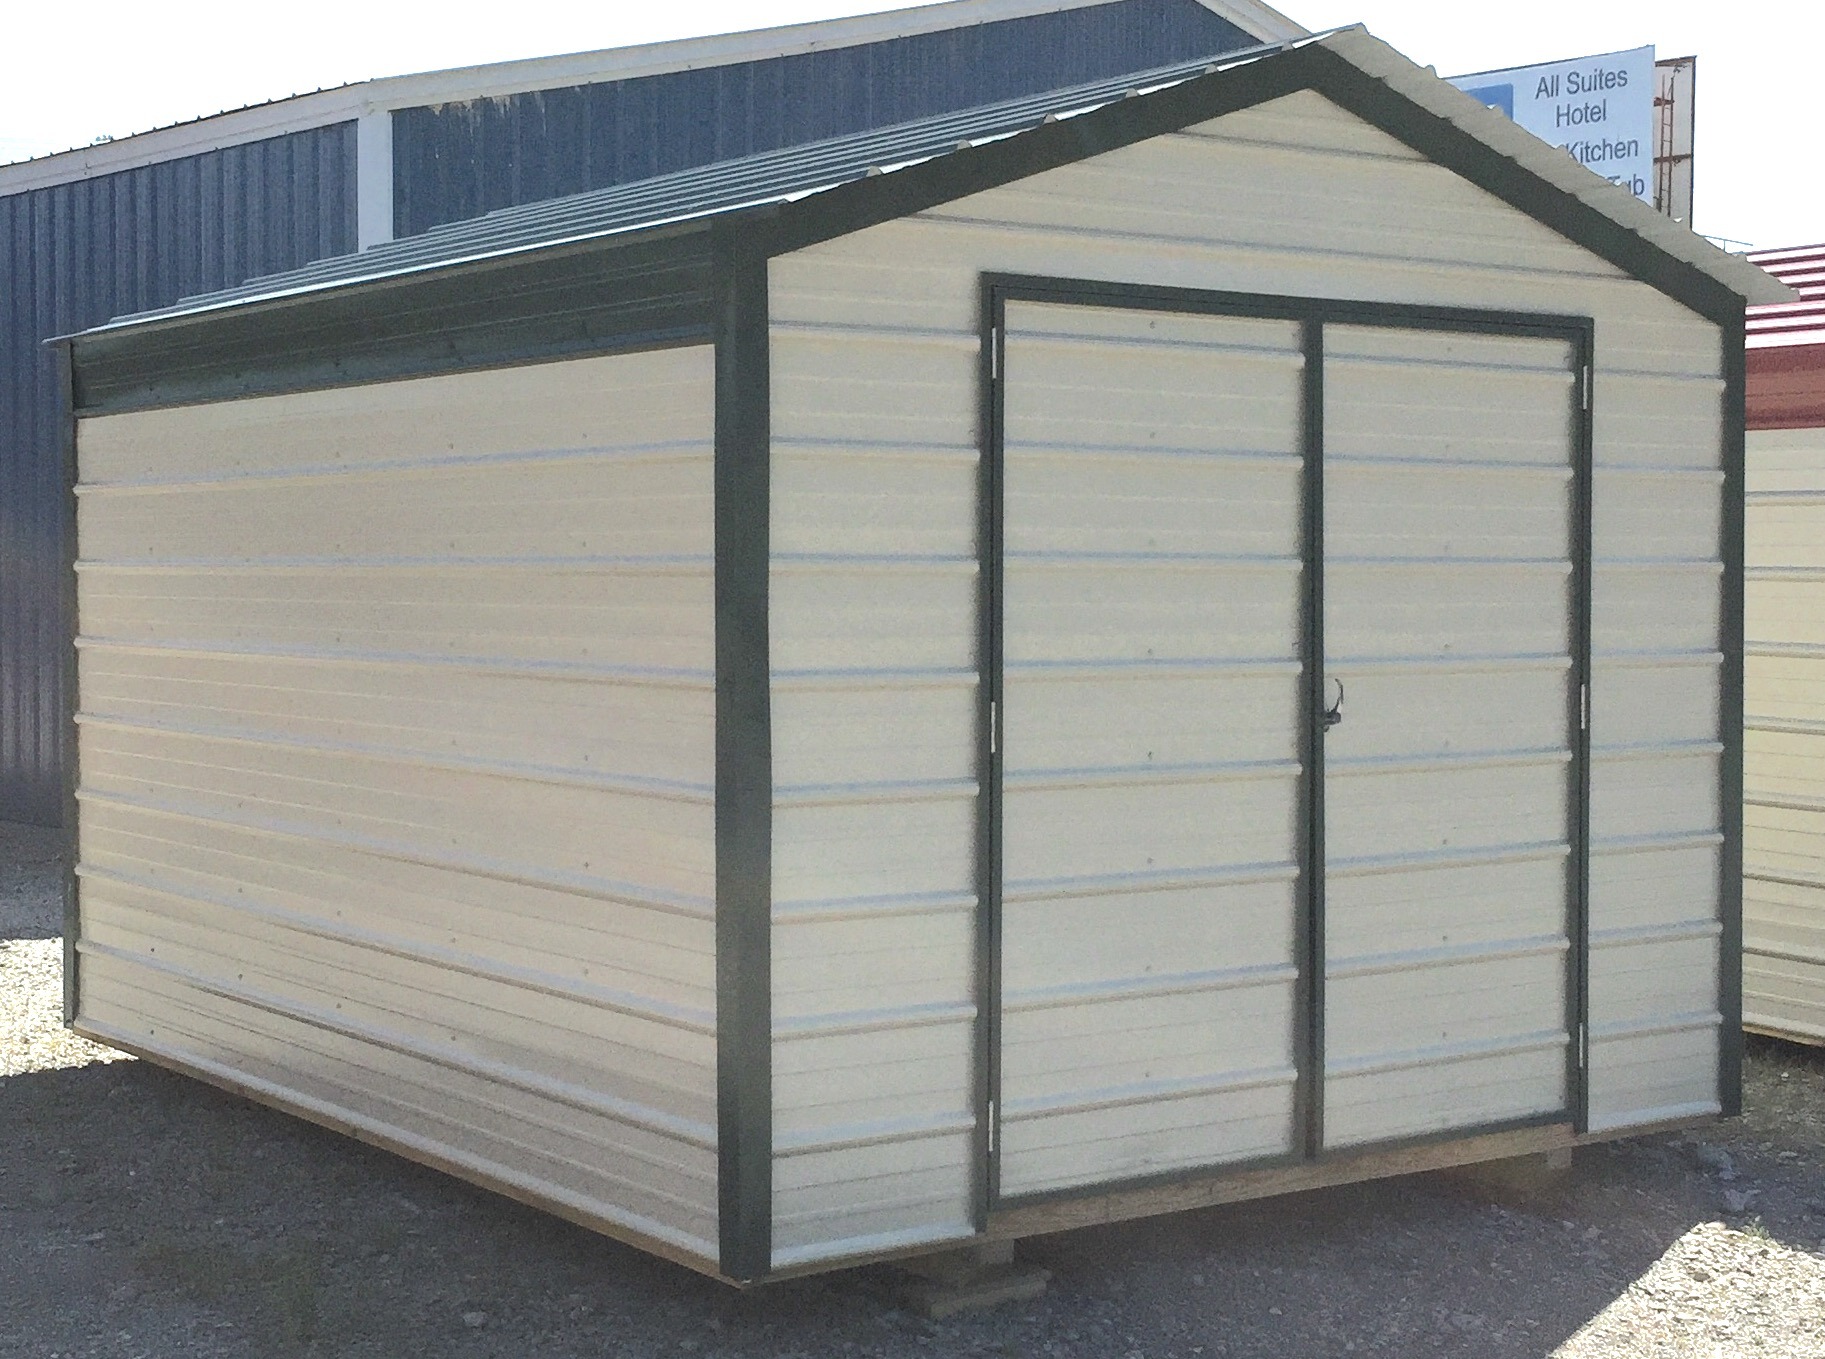 Tan metal economy series shed with black trim and roof